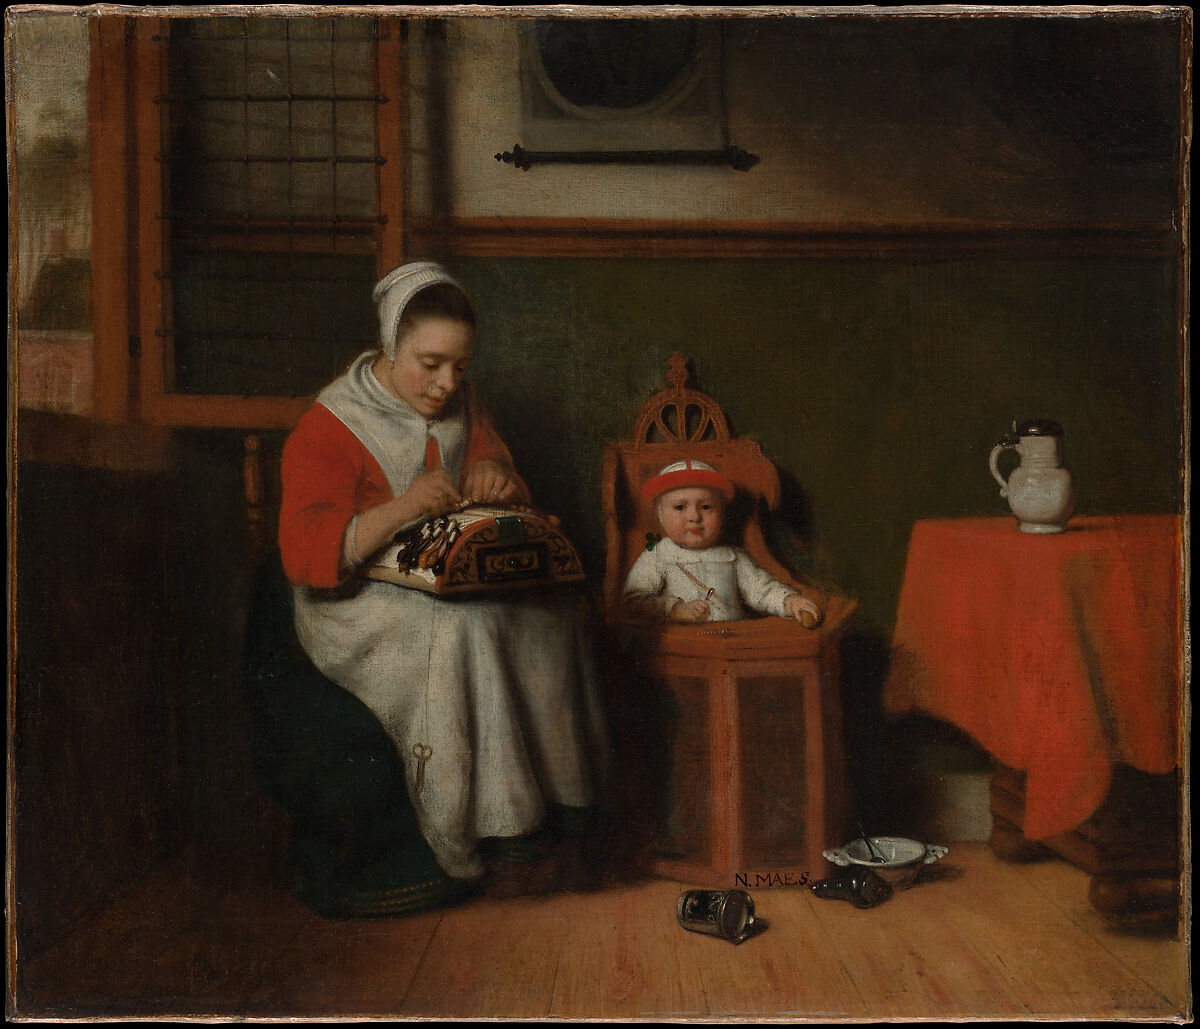 The Lacemaker, Nicolaes Maes, Oil on canvas